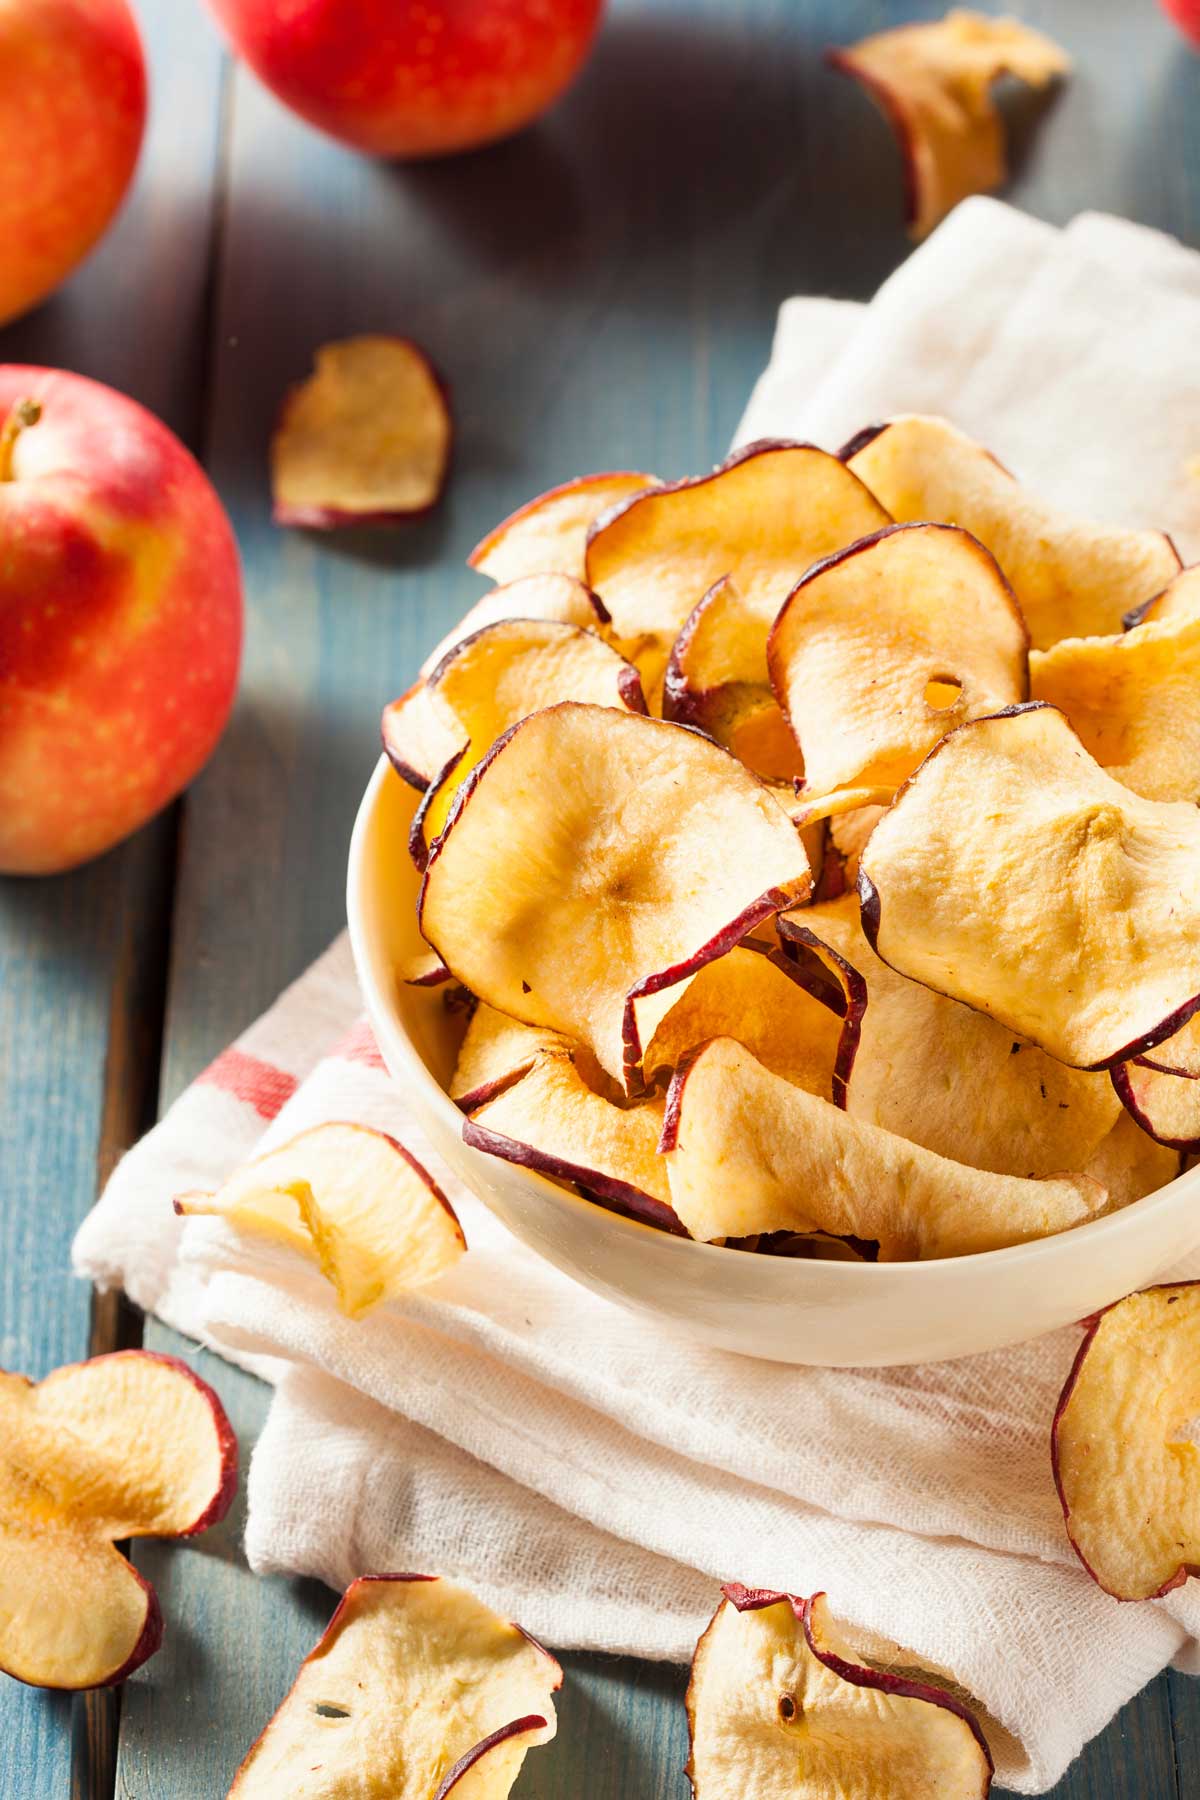 How to Make Dried Apples in the Oven and the Air Fryer